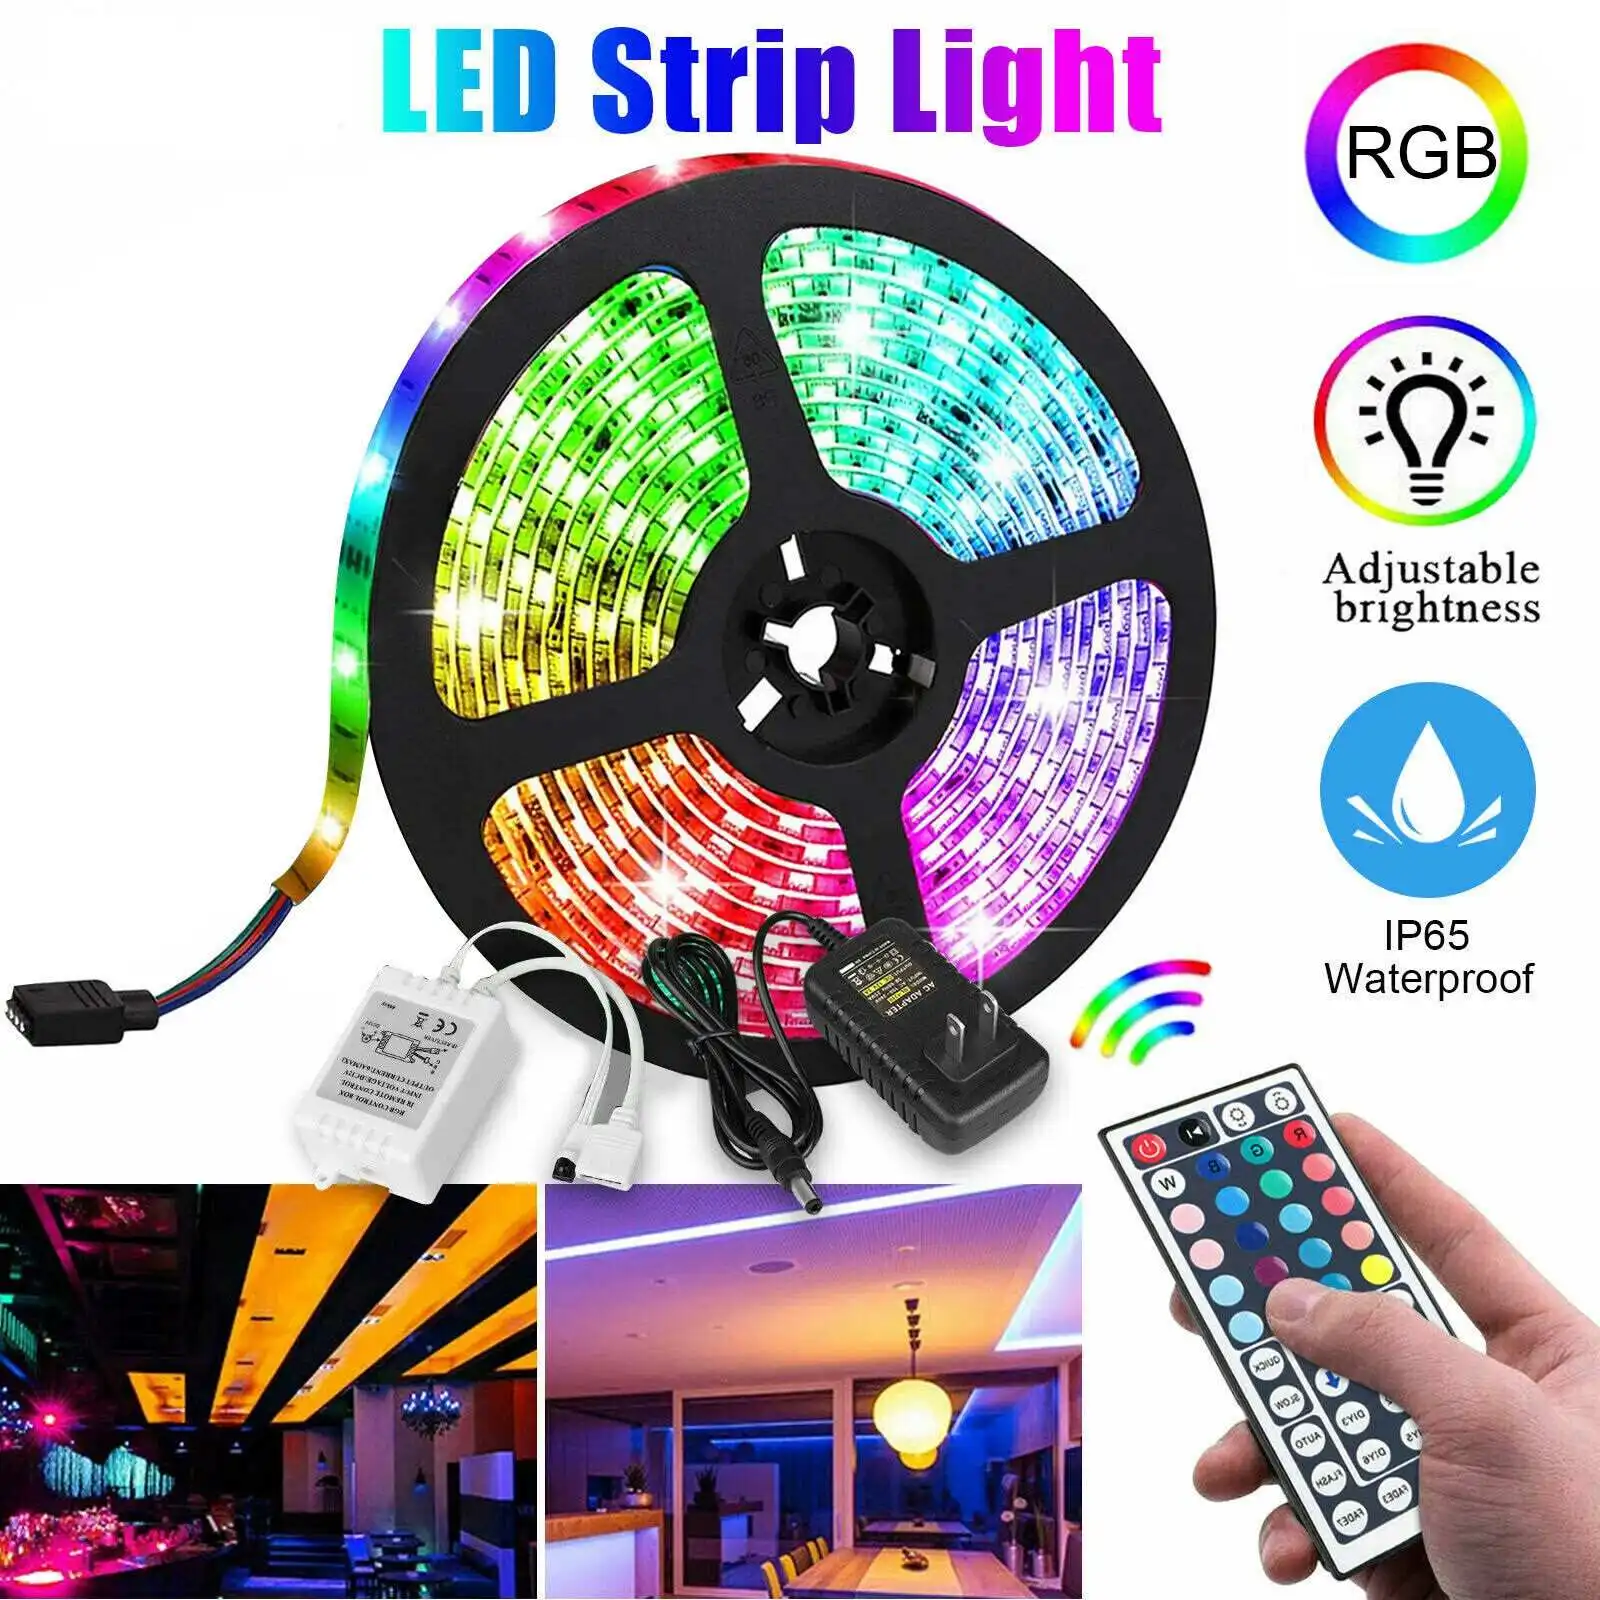 

LED Strip Light RGB 72W 2835 Flexible Ribbon Remote Control 12V Led Lights Strip With 44 Keys IP65 Waterproof Tape Diode+Adapter